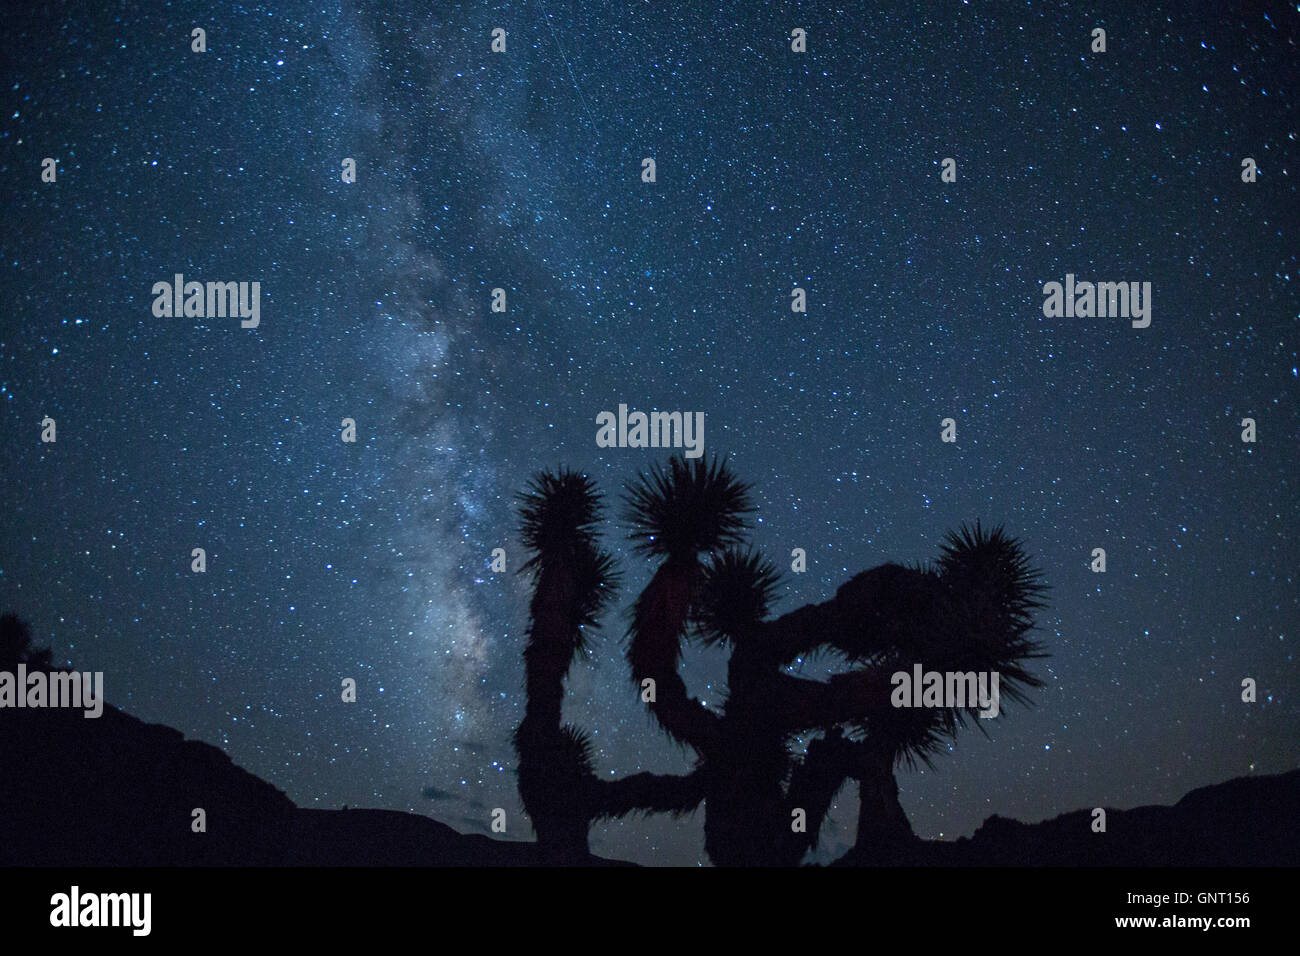 The stars of the Milky Way in the night sky over a Joshua Tree in the Piper Mountain Wilderness in the desert of the White Mountains near Big Pine, California. Stock Photo